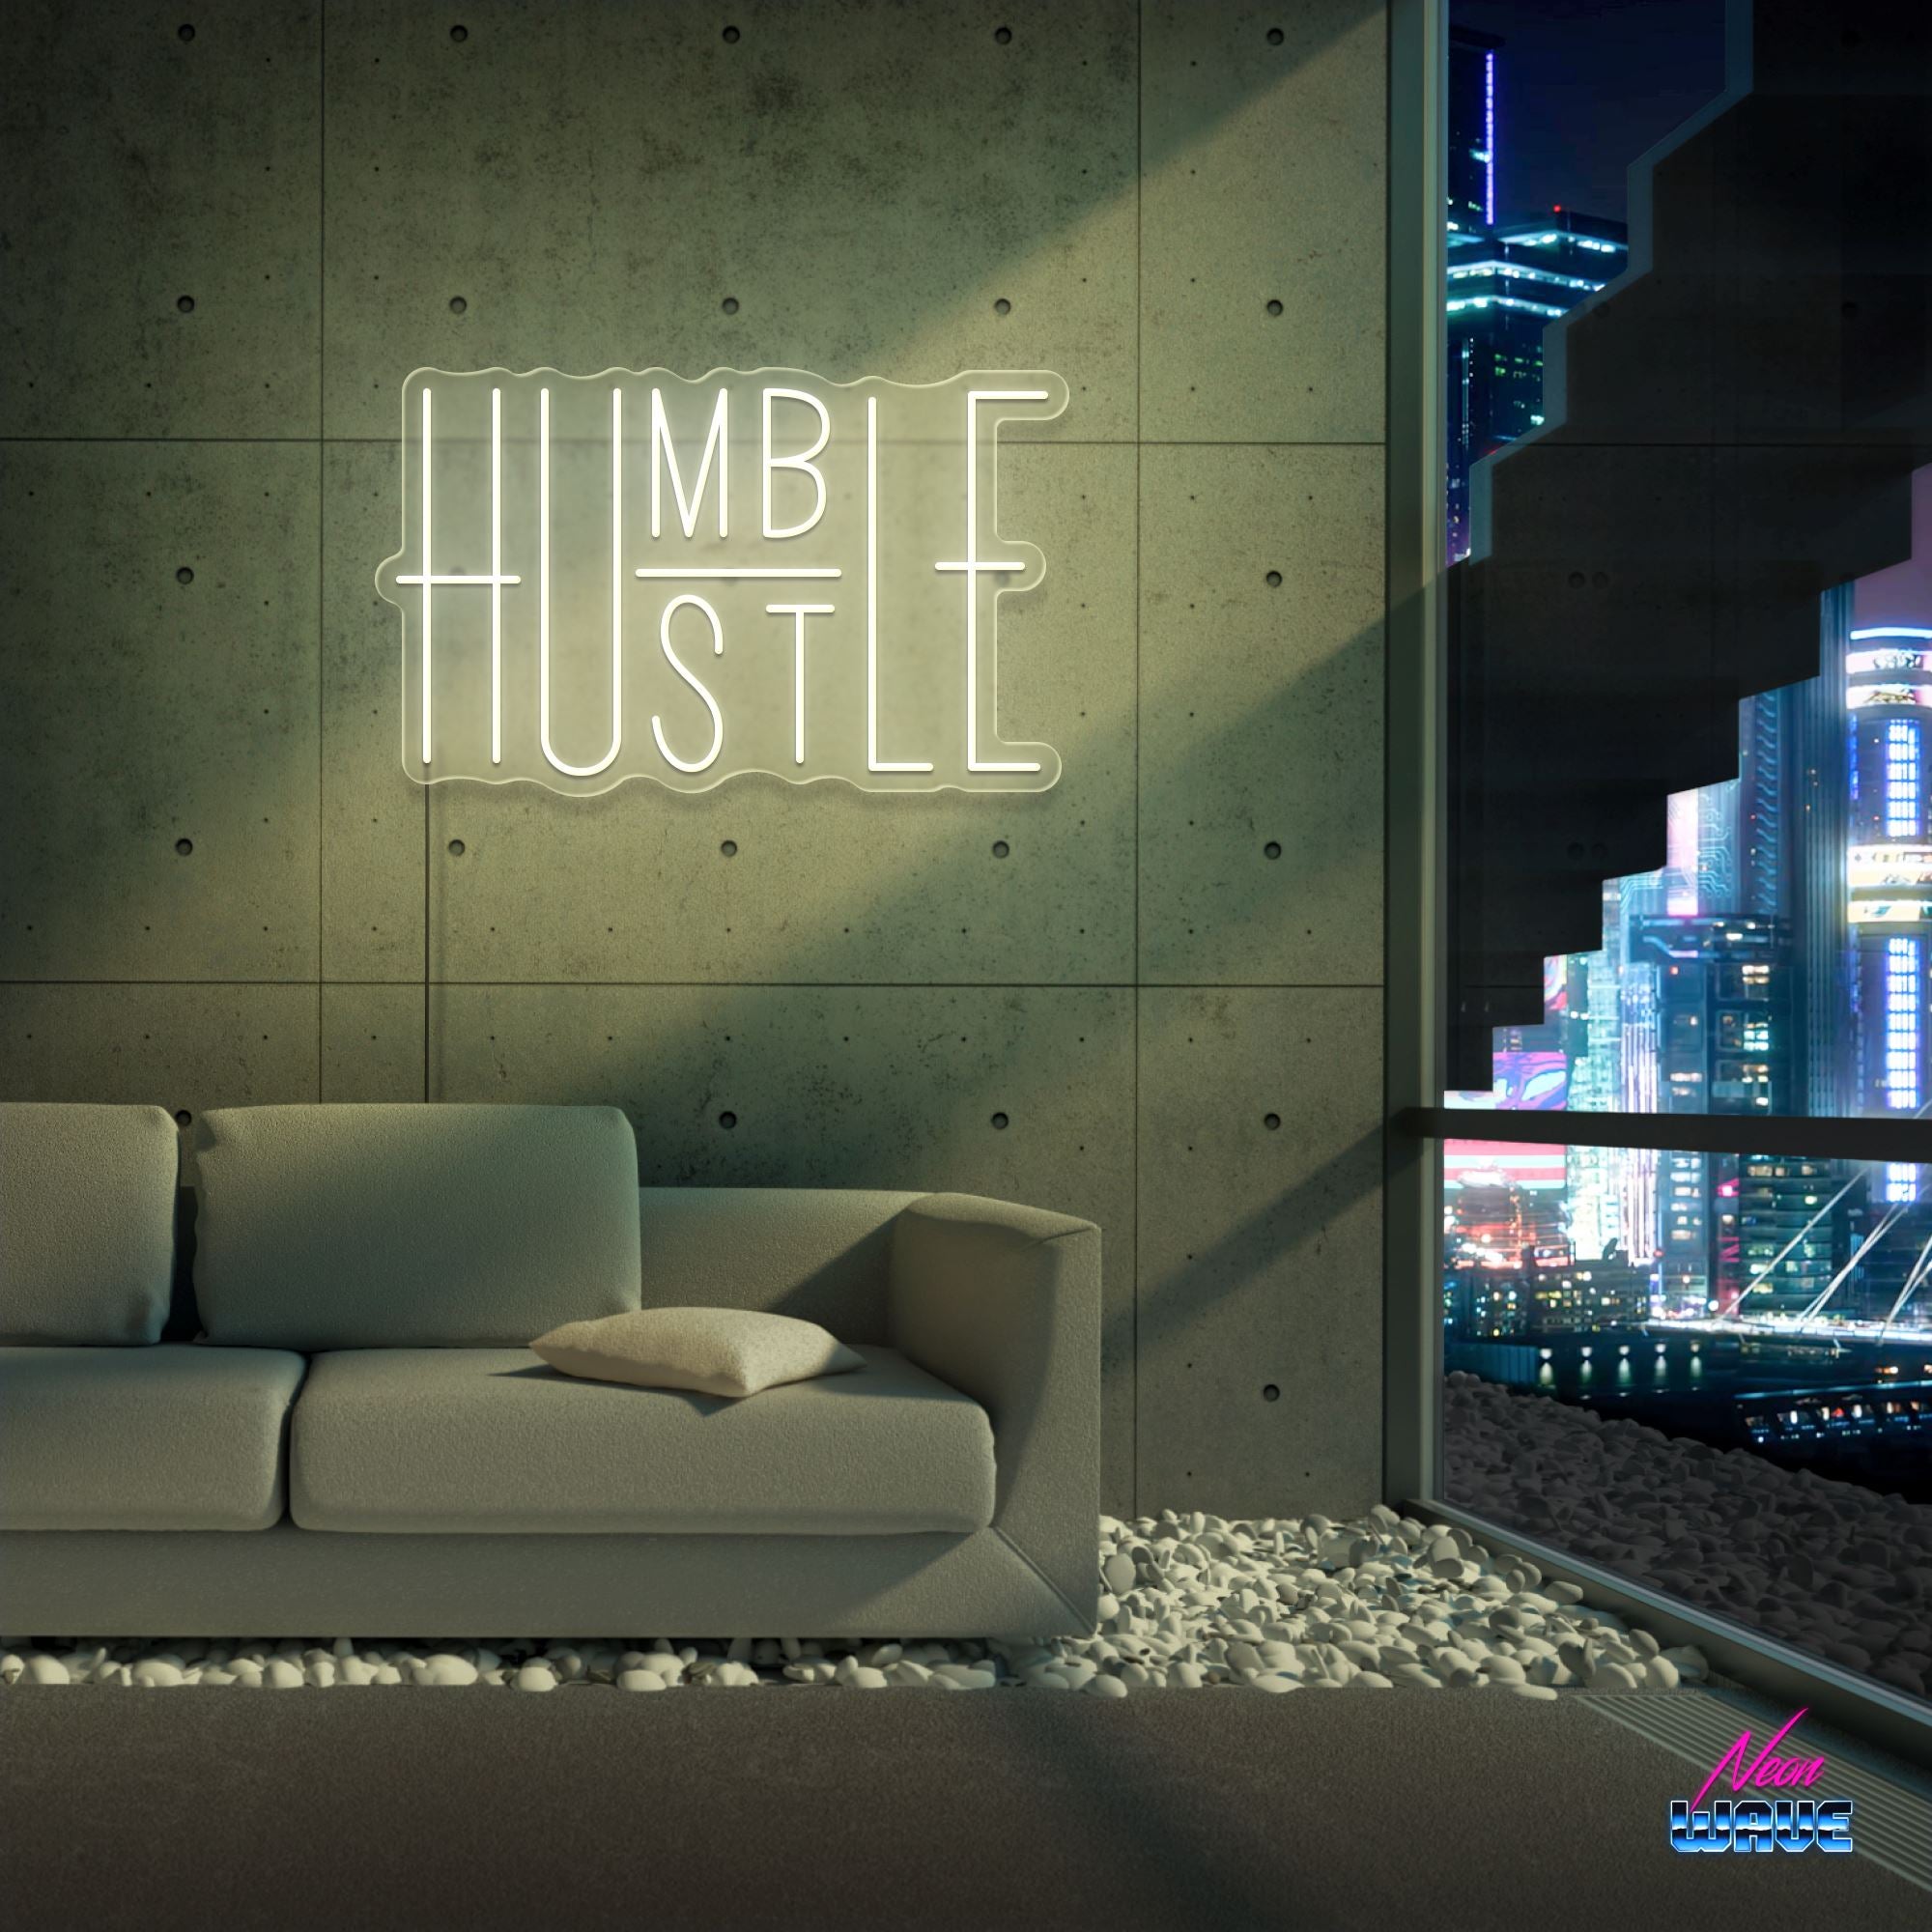 HUMBLE - HUSTLE Neon Sign Neonwave.ch 50cm Warmweiss 